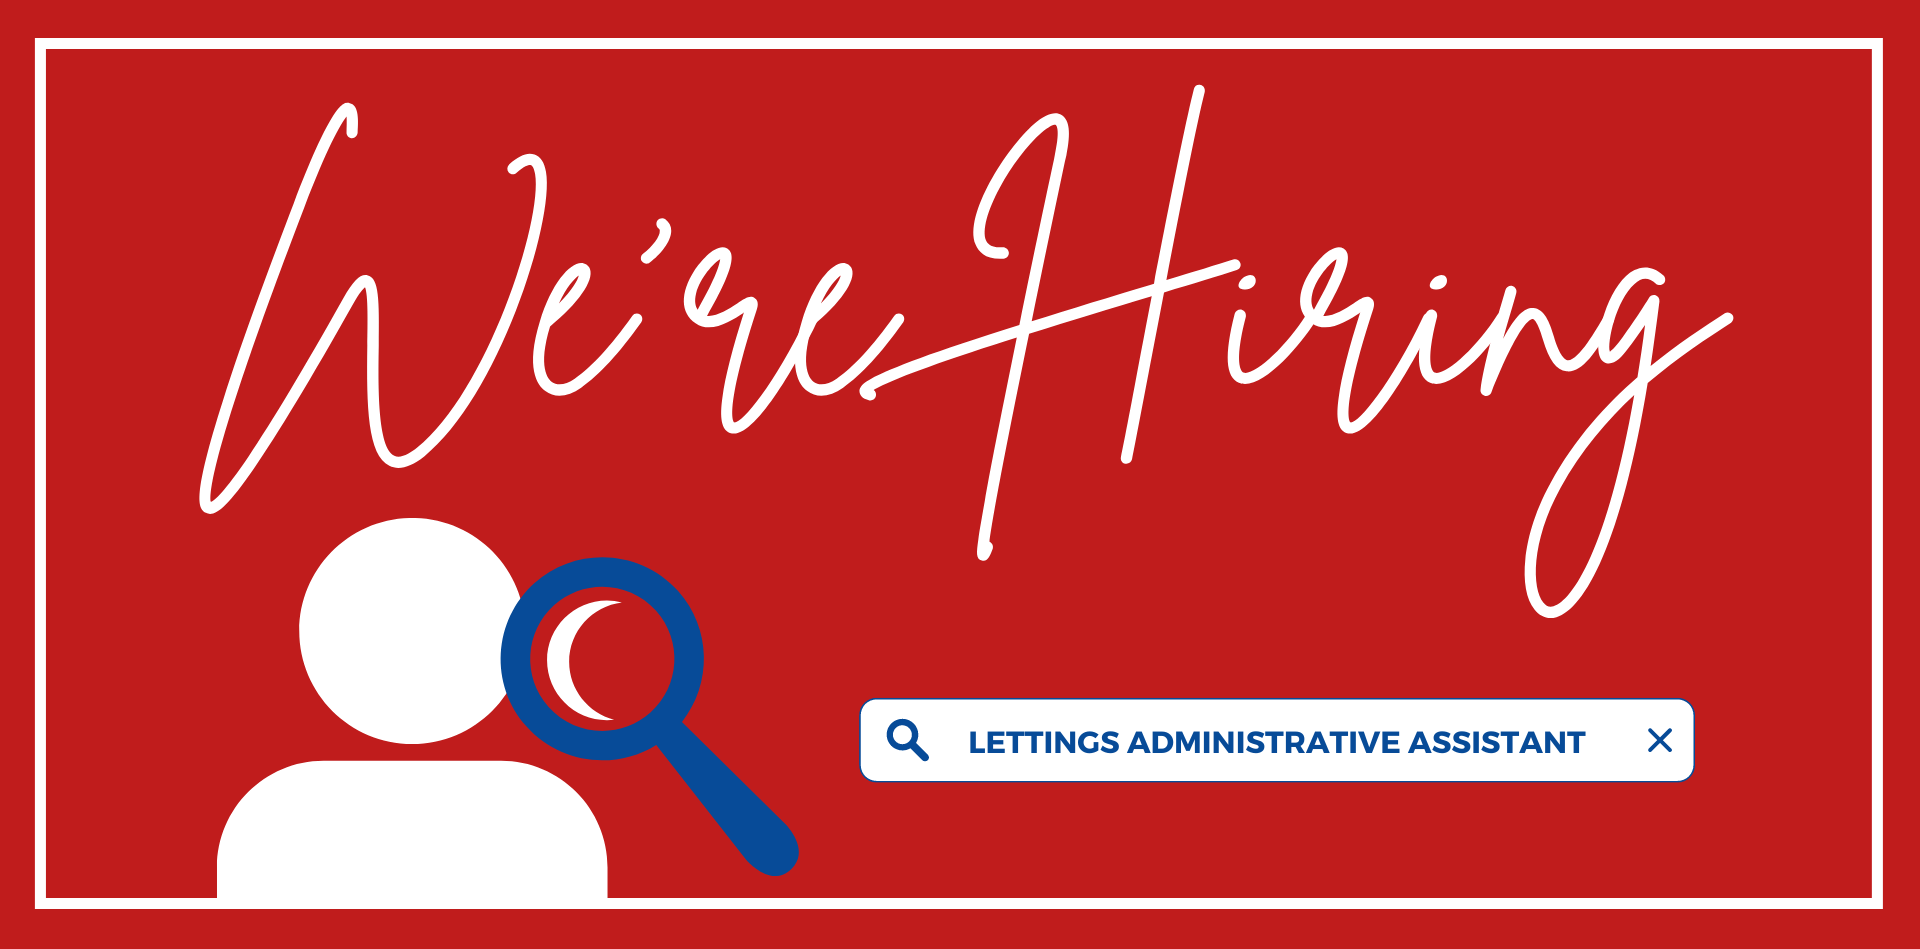 lettings_administrative_assistant_hd